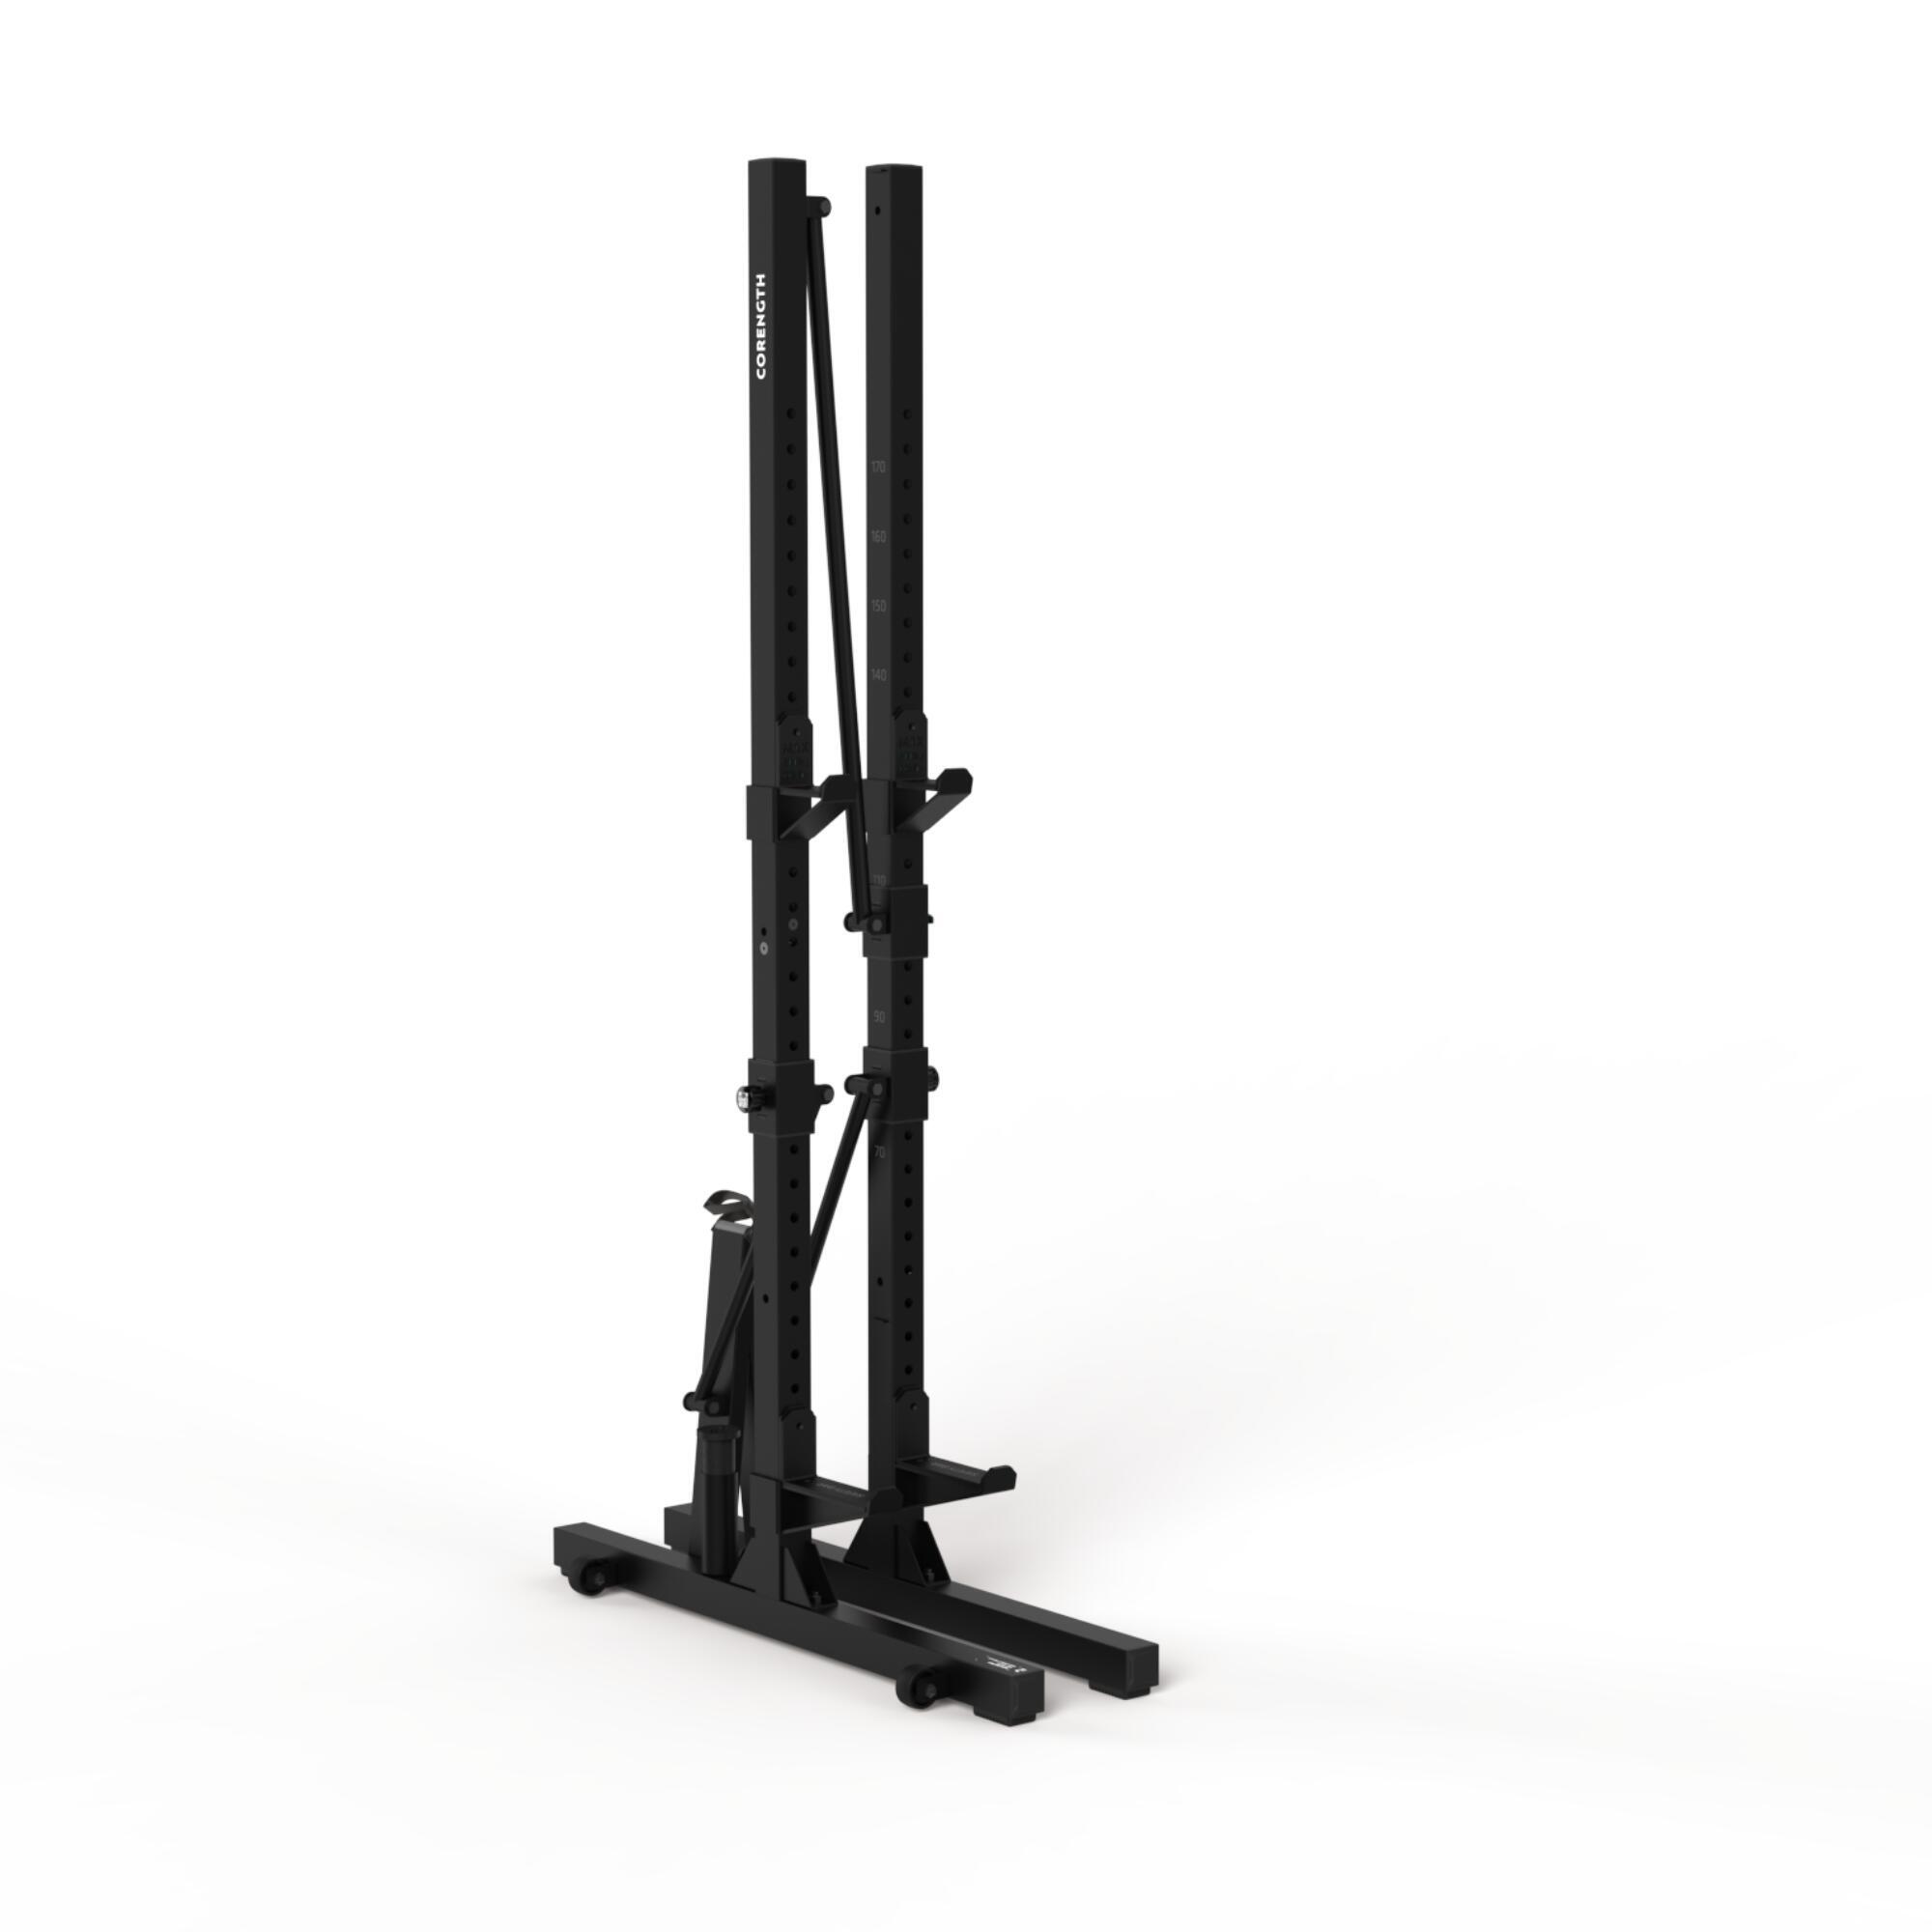 Fold-Down/Retractable Squat, Bench & Pull-Up Weight Training Rack 500 6/6